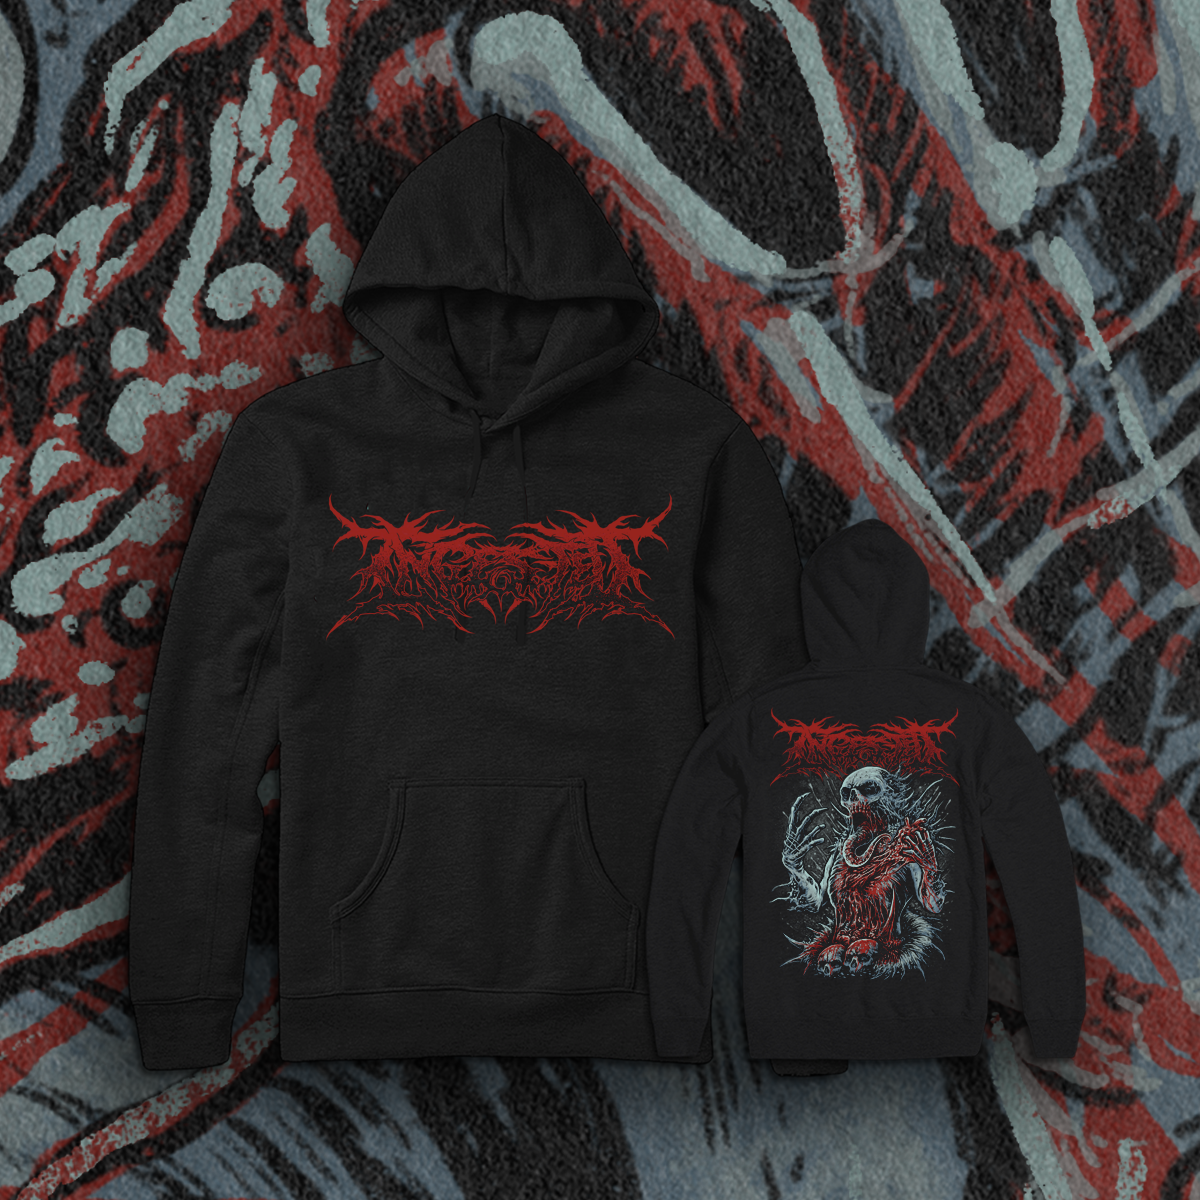 INGESTED "PULLED TO PIECES" PULLOVER HOOD (PRE-ORDER)